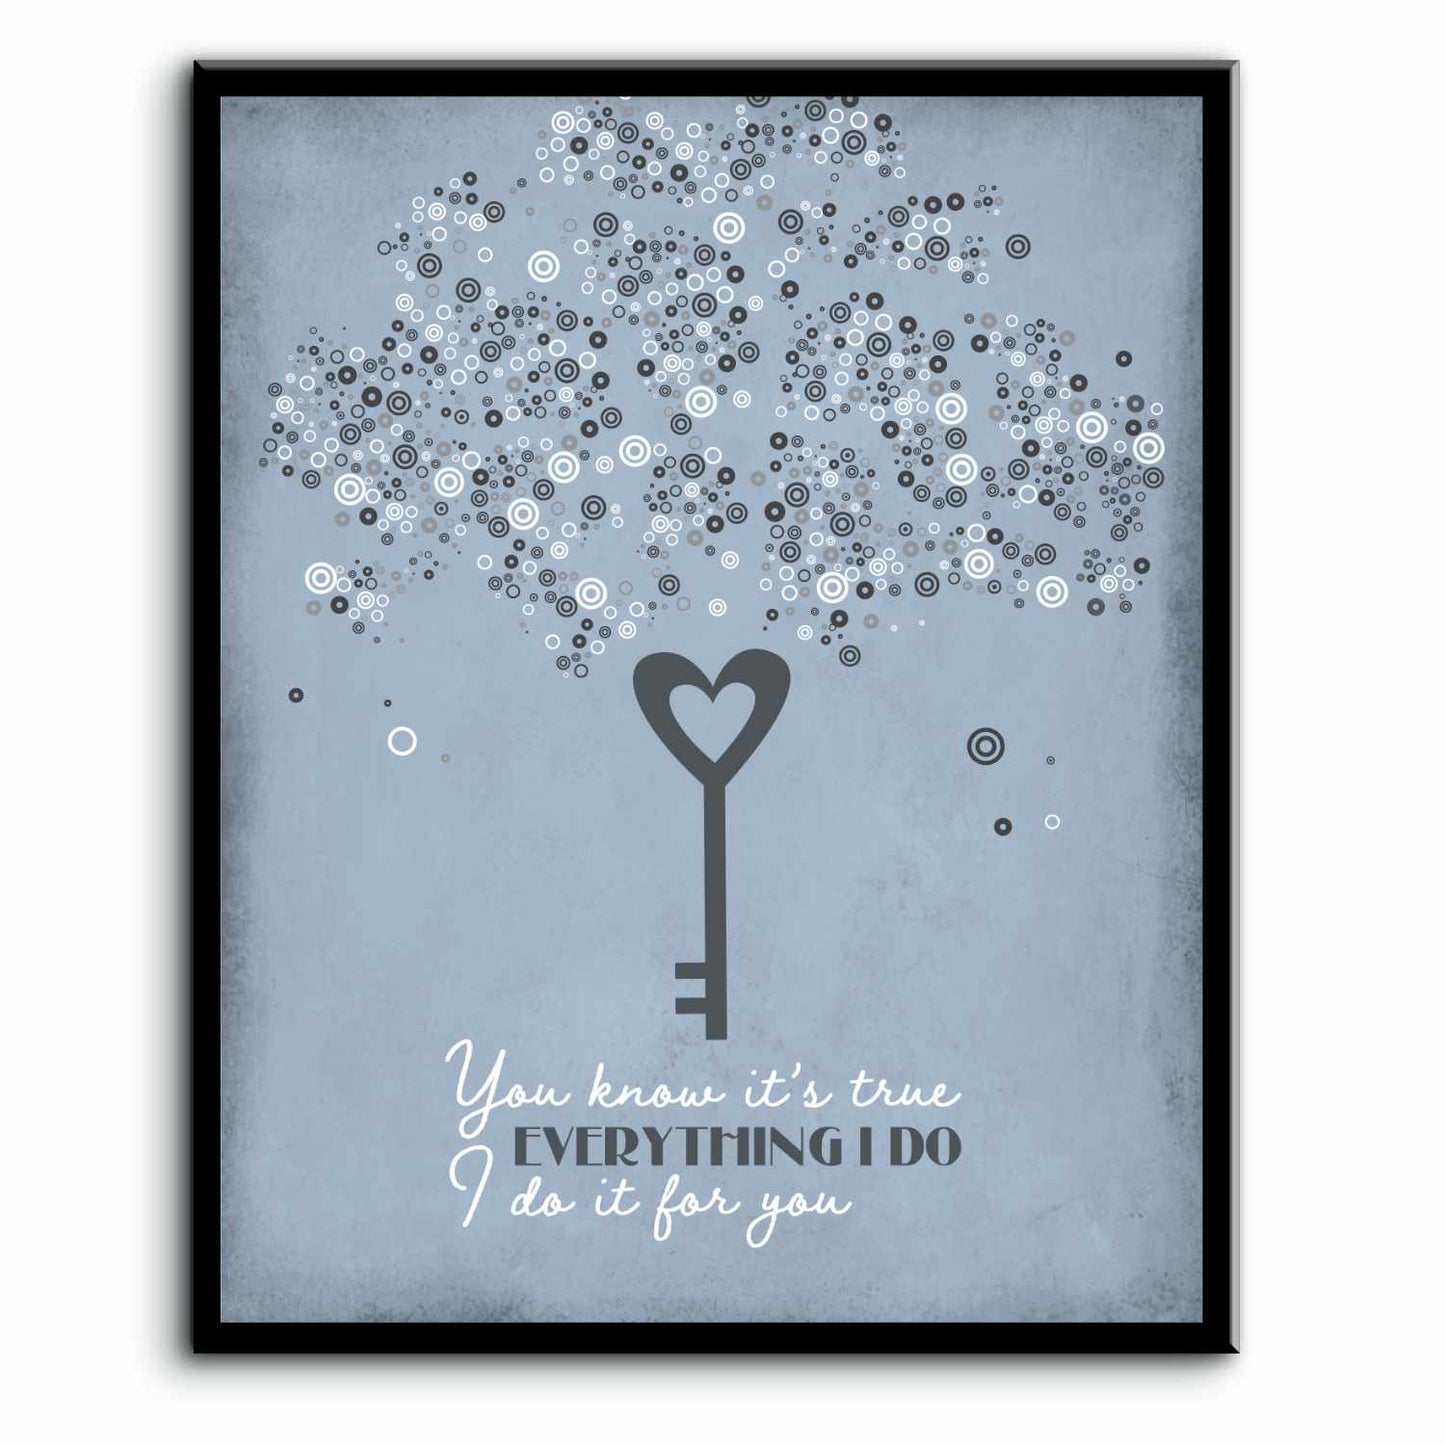 Everything I Do by Bryan Adam - Songs of Classic Rock Art Song Lyrics Art Song Lyrics Art 8x10 Plaque Mount 